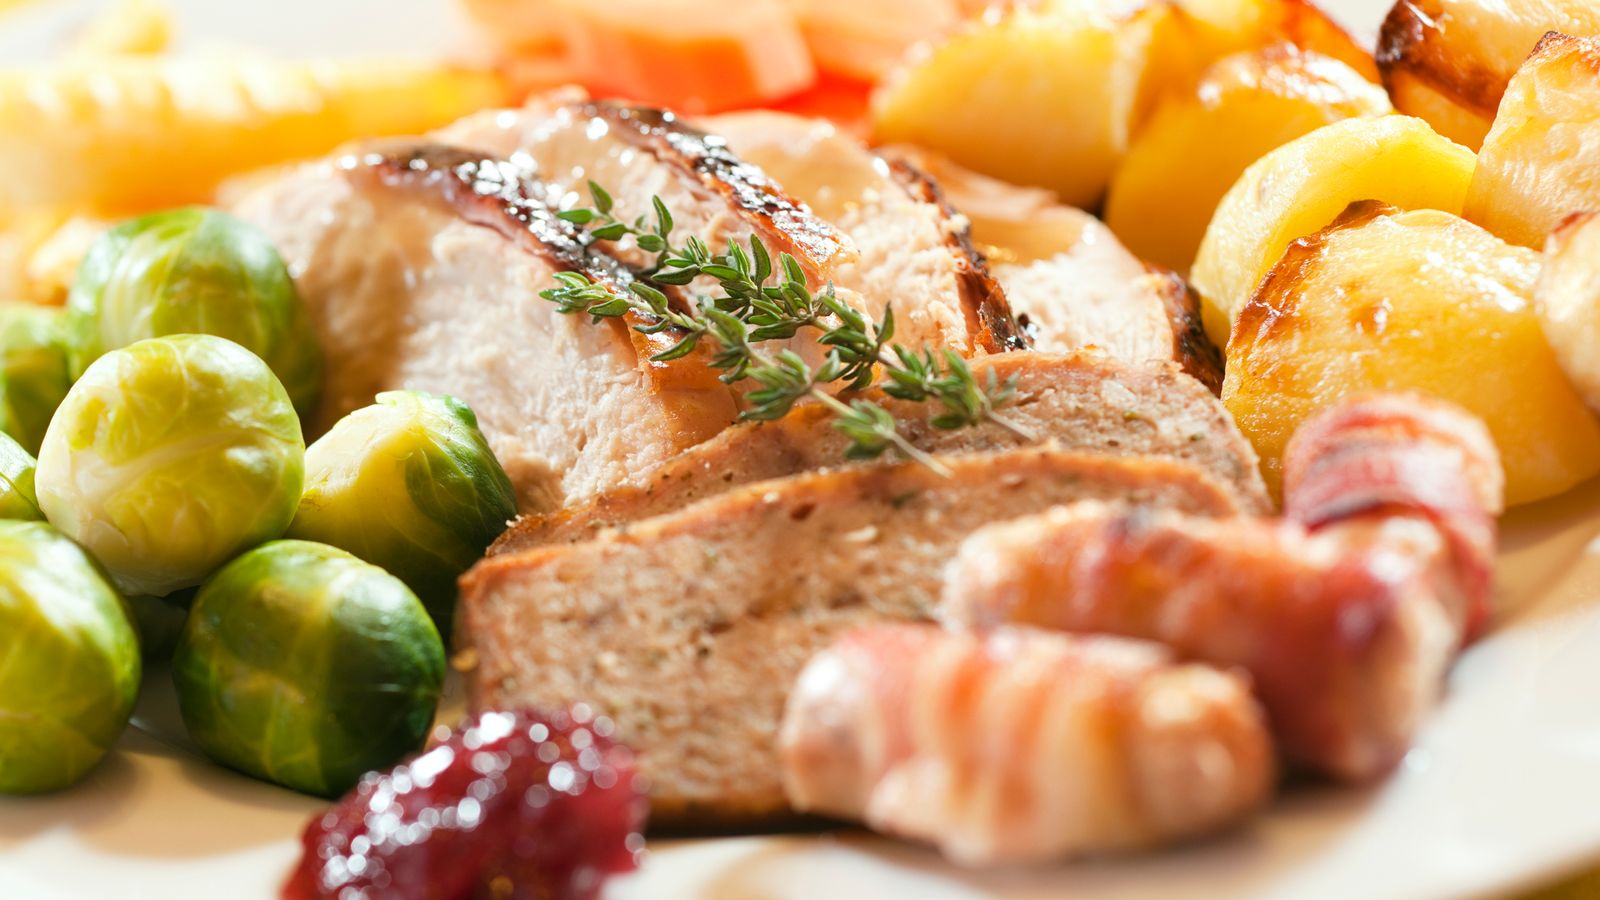 Cost of Christmas dinner set to rise in 'record-breaking' festive grocery spree